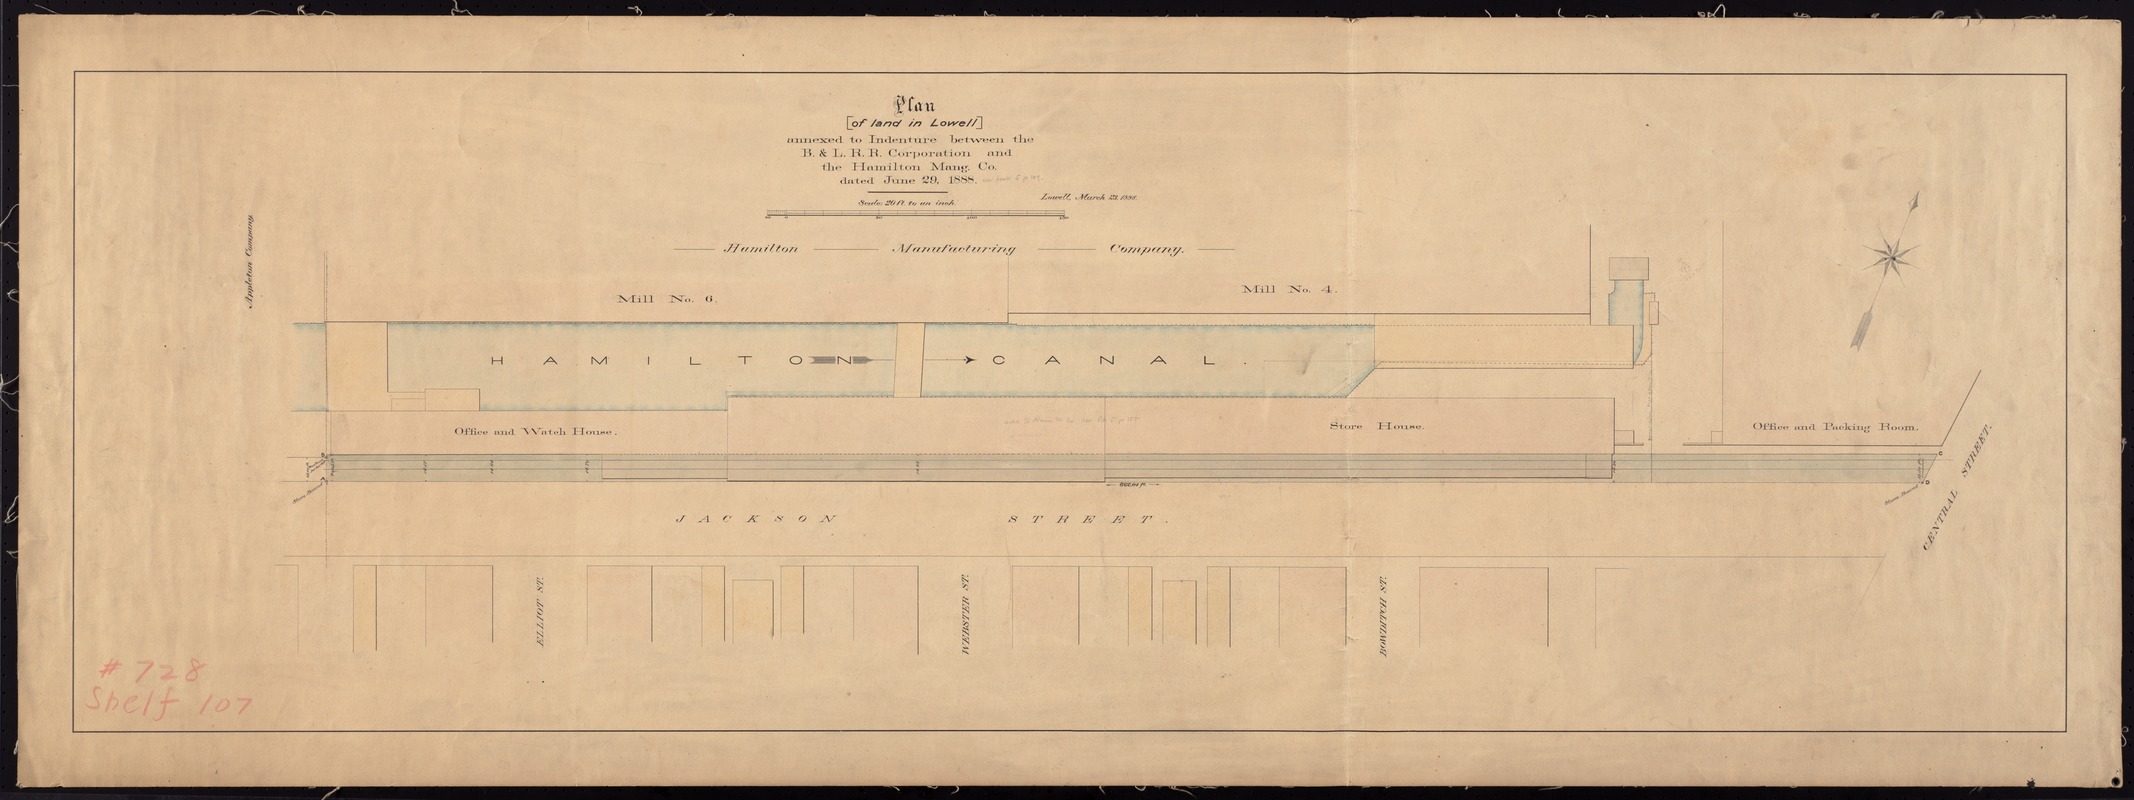 Land in Lowell between Boston and Lowell Railroad